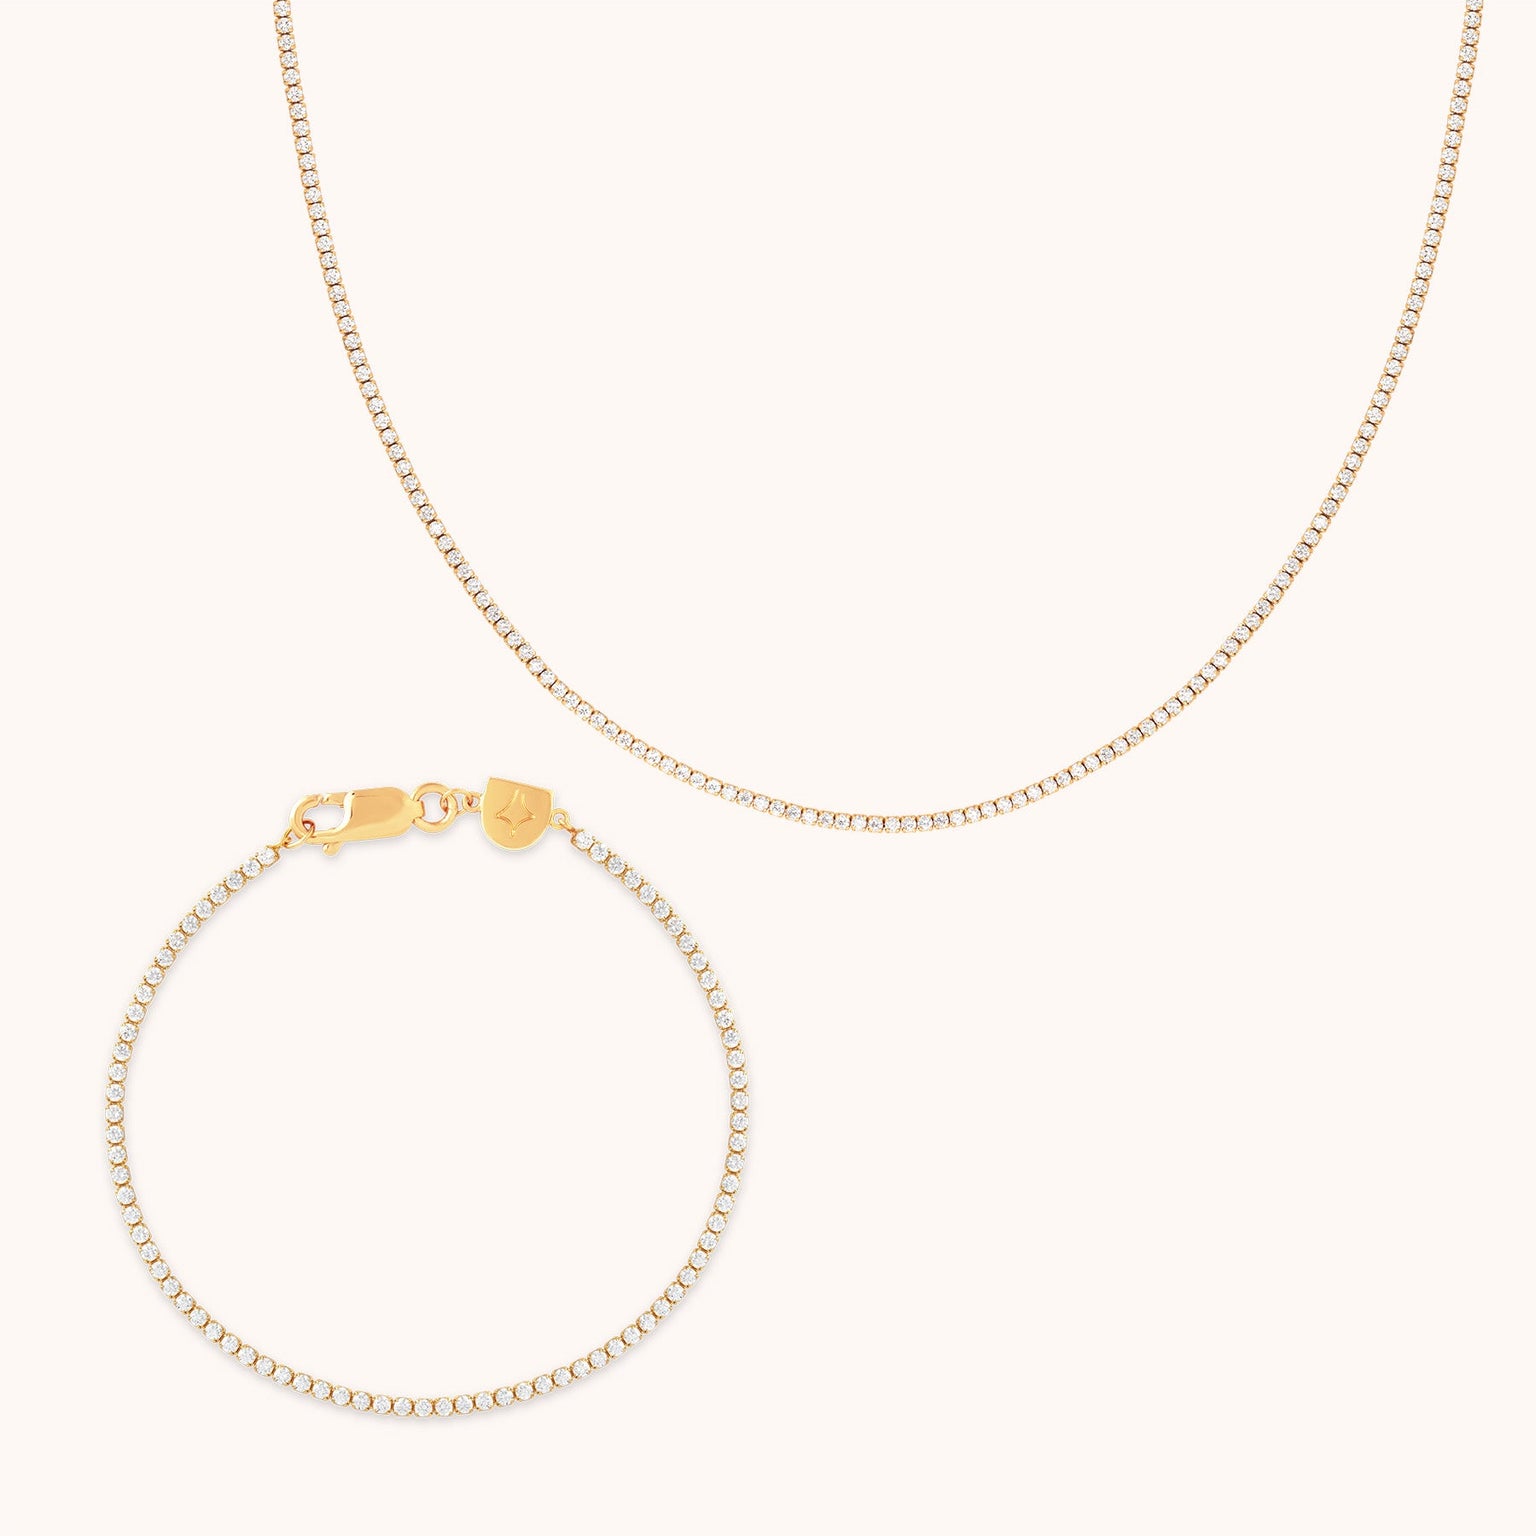 Tennis Chain Gift Set in Gold